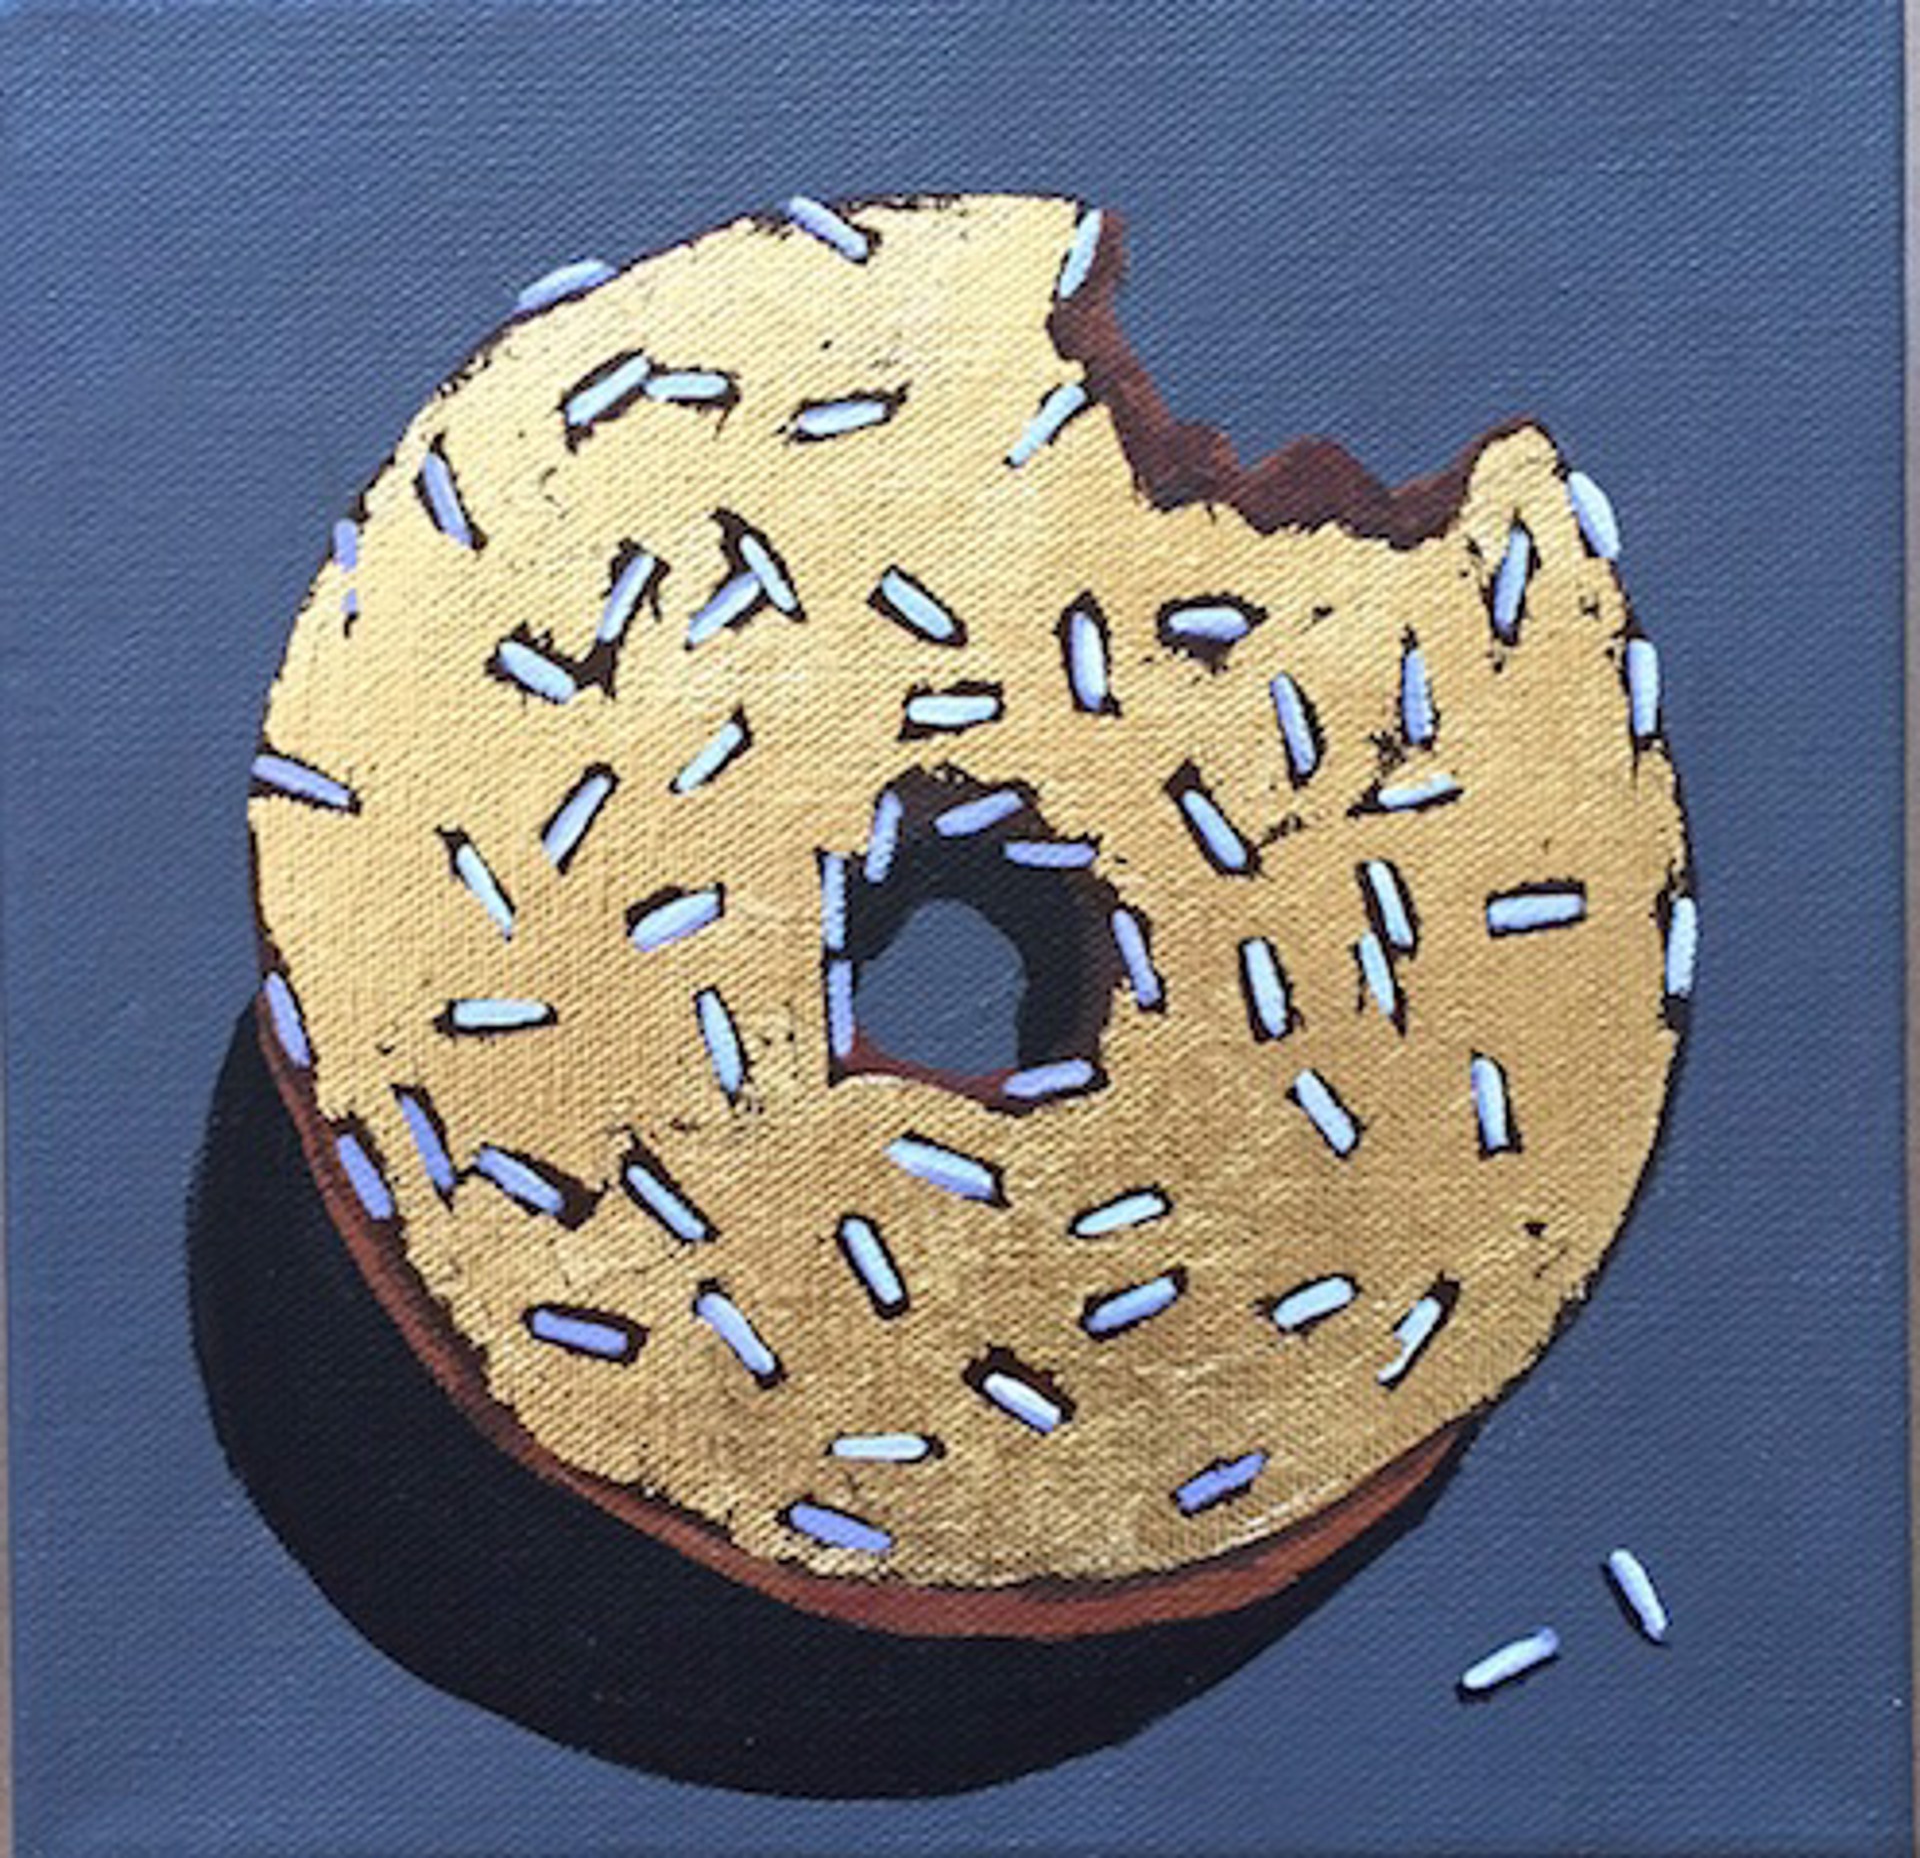 Gold Leaf White Sprinkles by Terry Romero Paul